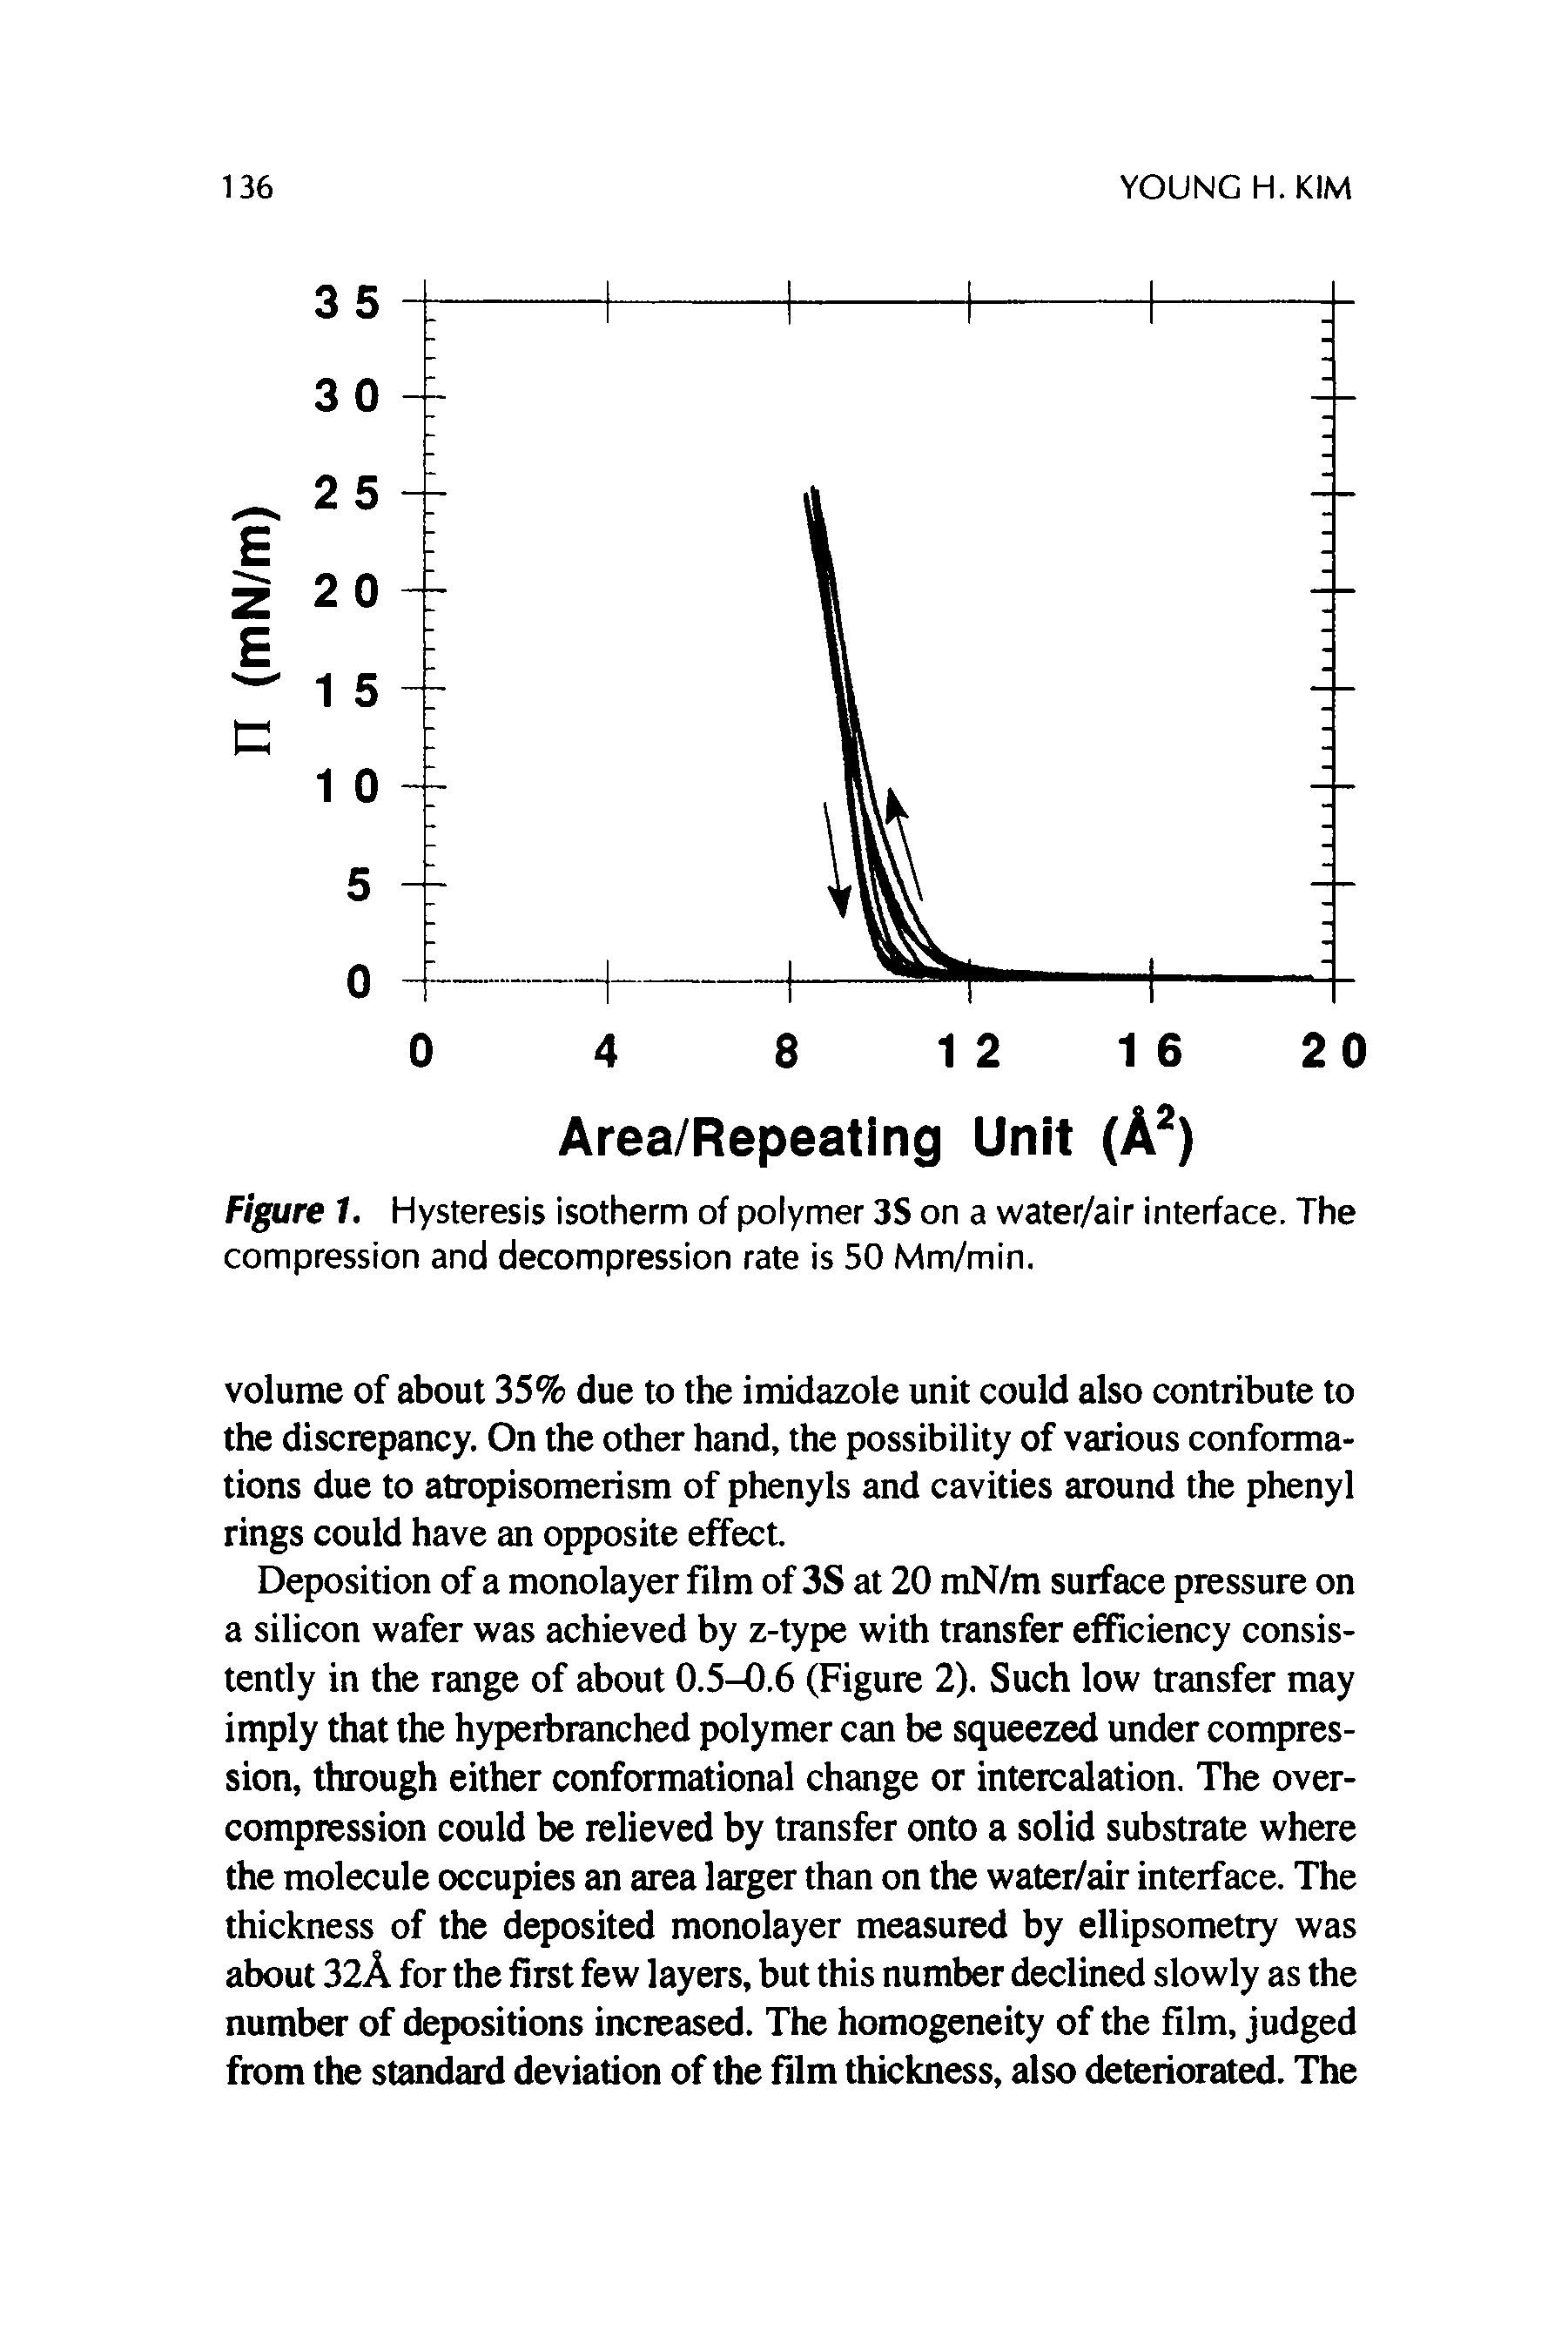 Figure 1. Hysteresis isotherm of polymer 3S on a water/air interface. The compression and decompression rate is 50 Mm/min.